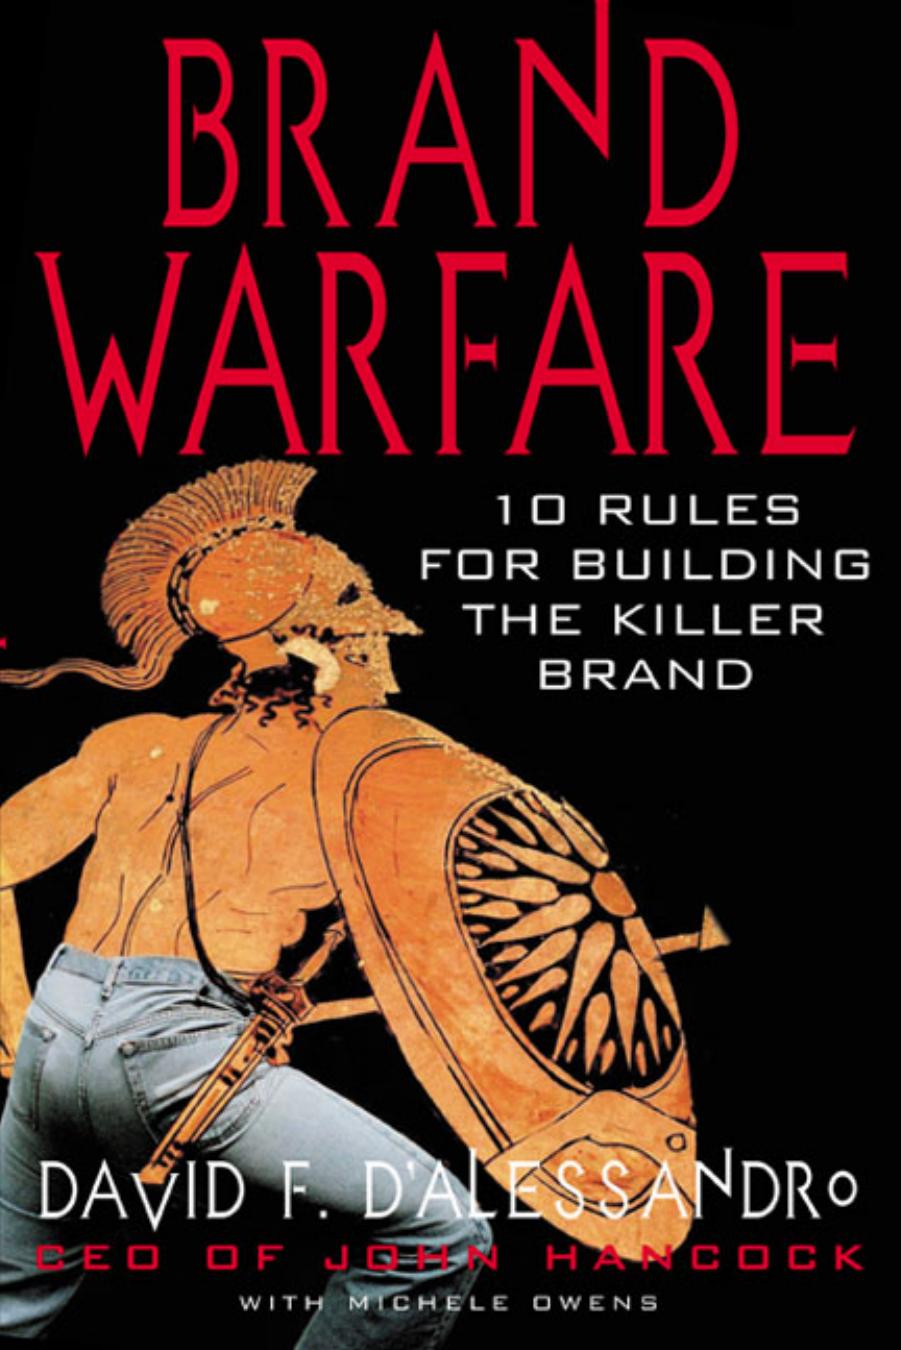 DAlessandro D.F. Brand Warfare 10 Rules for Building the Killer Brand 2001